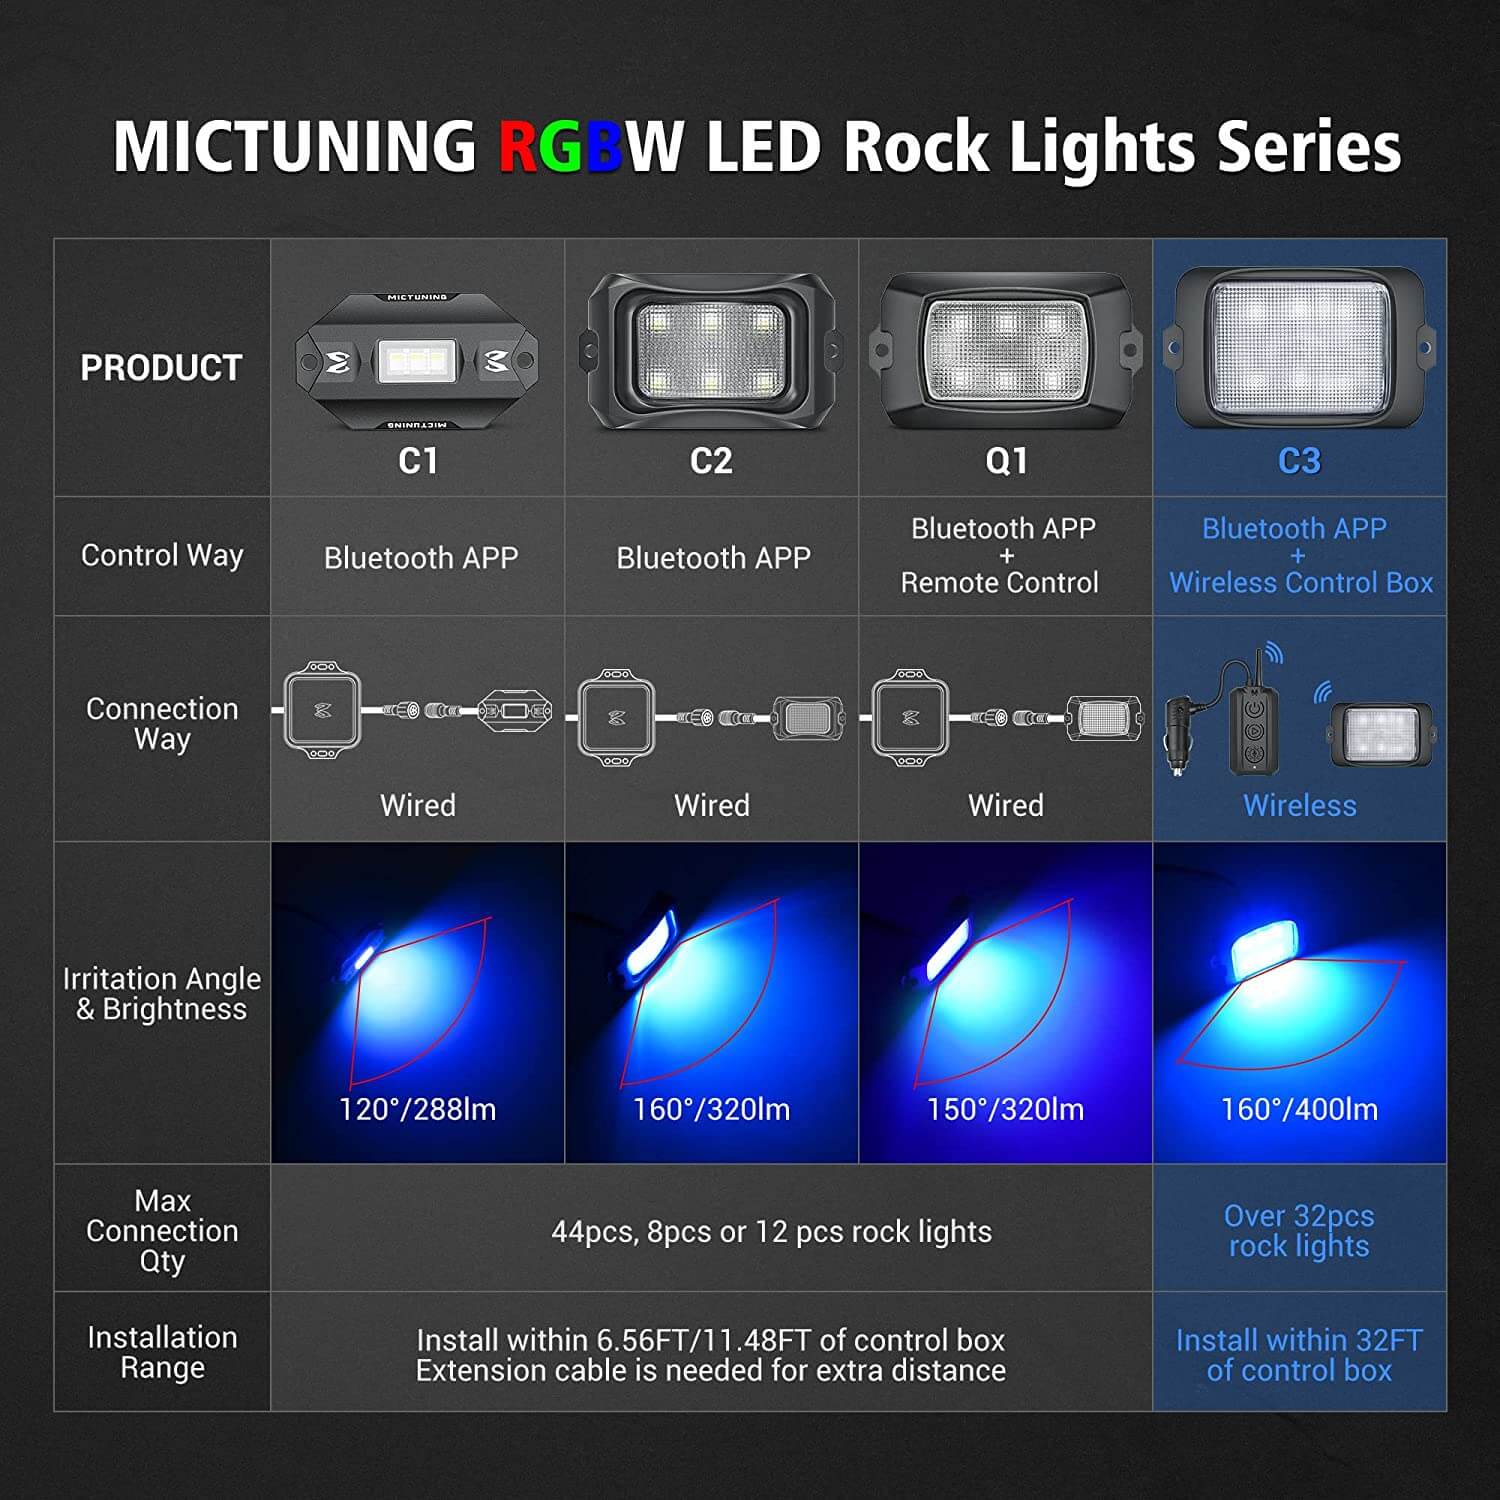 C3 Extensible RGBW LED Rock Lights - 4 Pods Wireless Control Multi-Color Neon Underglow Lights